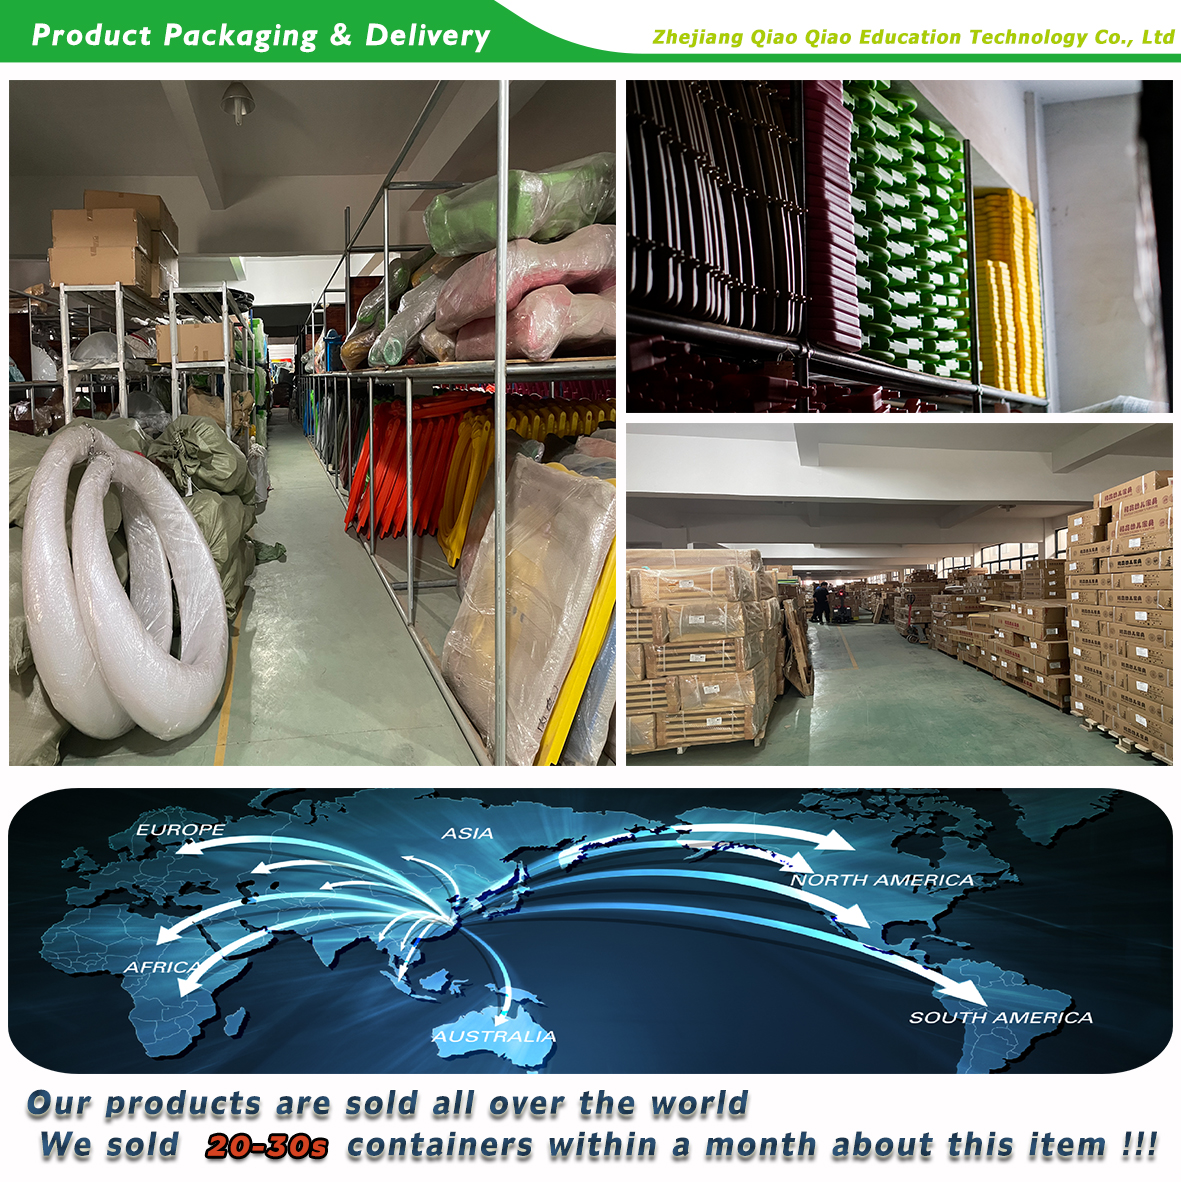 QiaoQiao product packaging&delivery